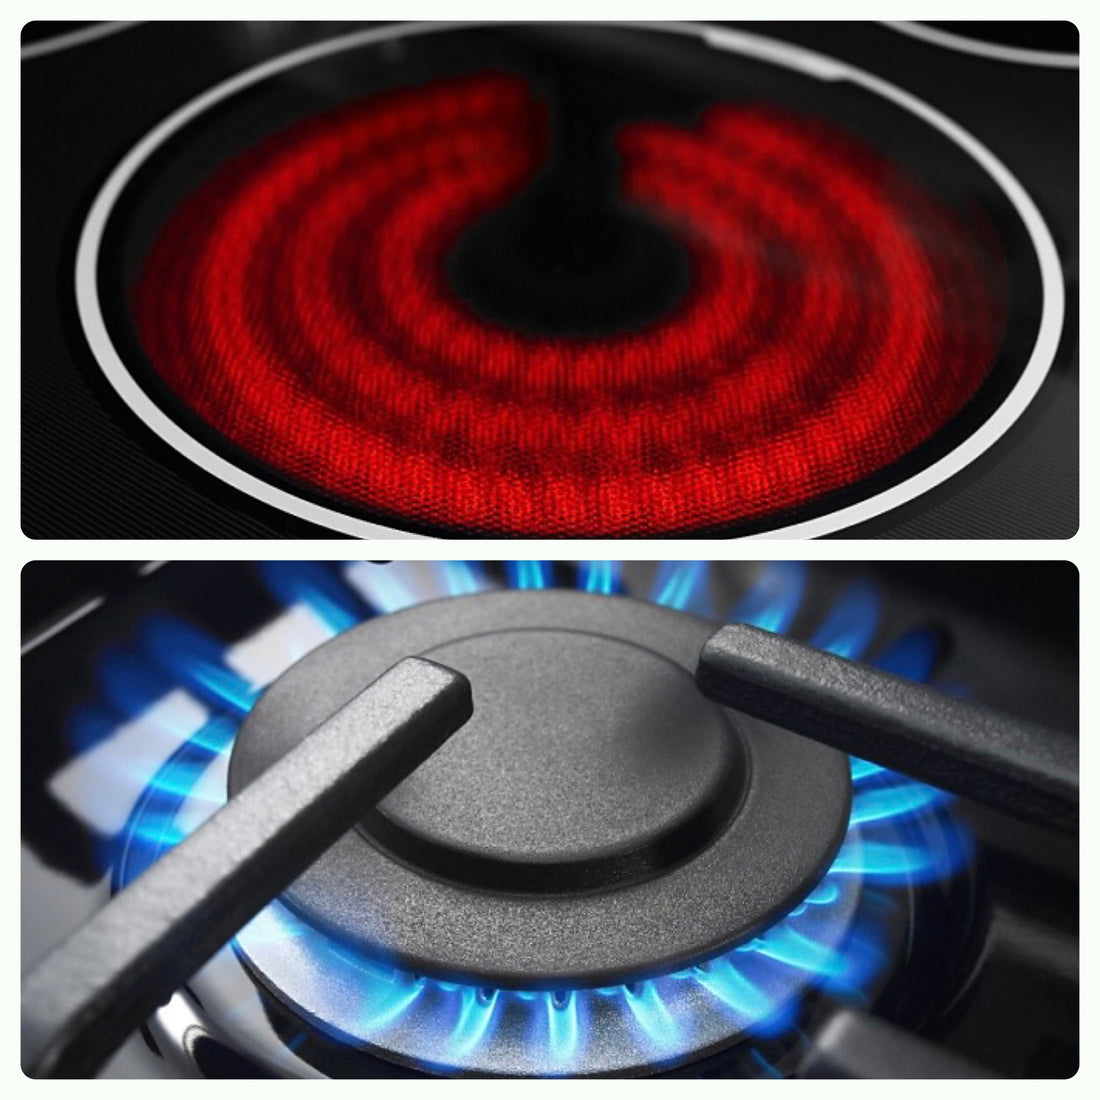 Differences Between Gas and Electric Burners